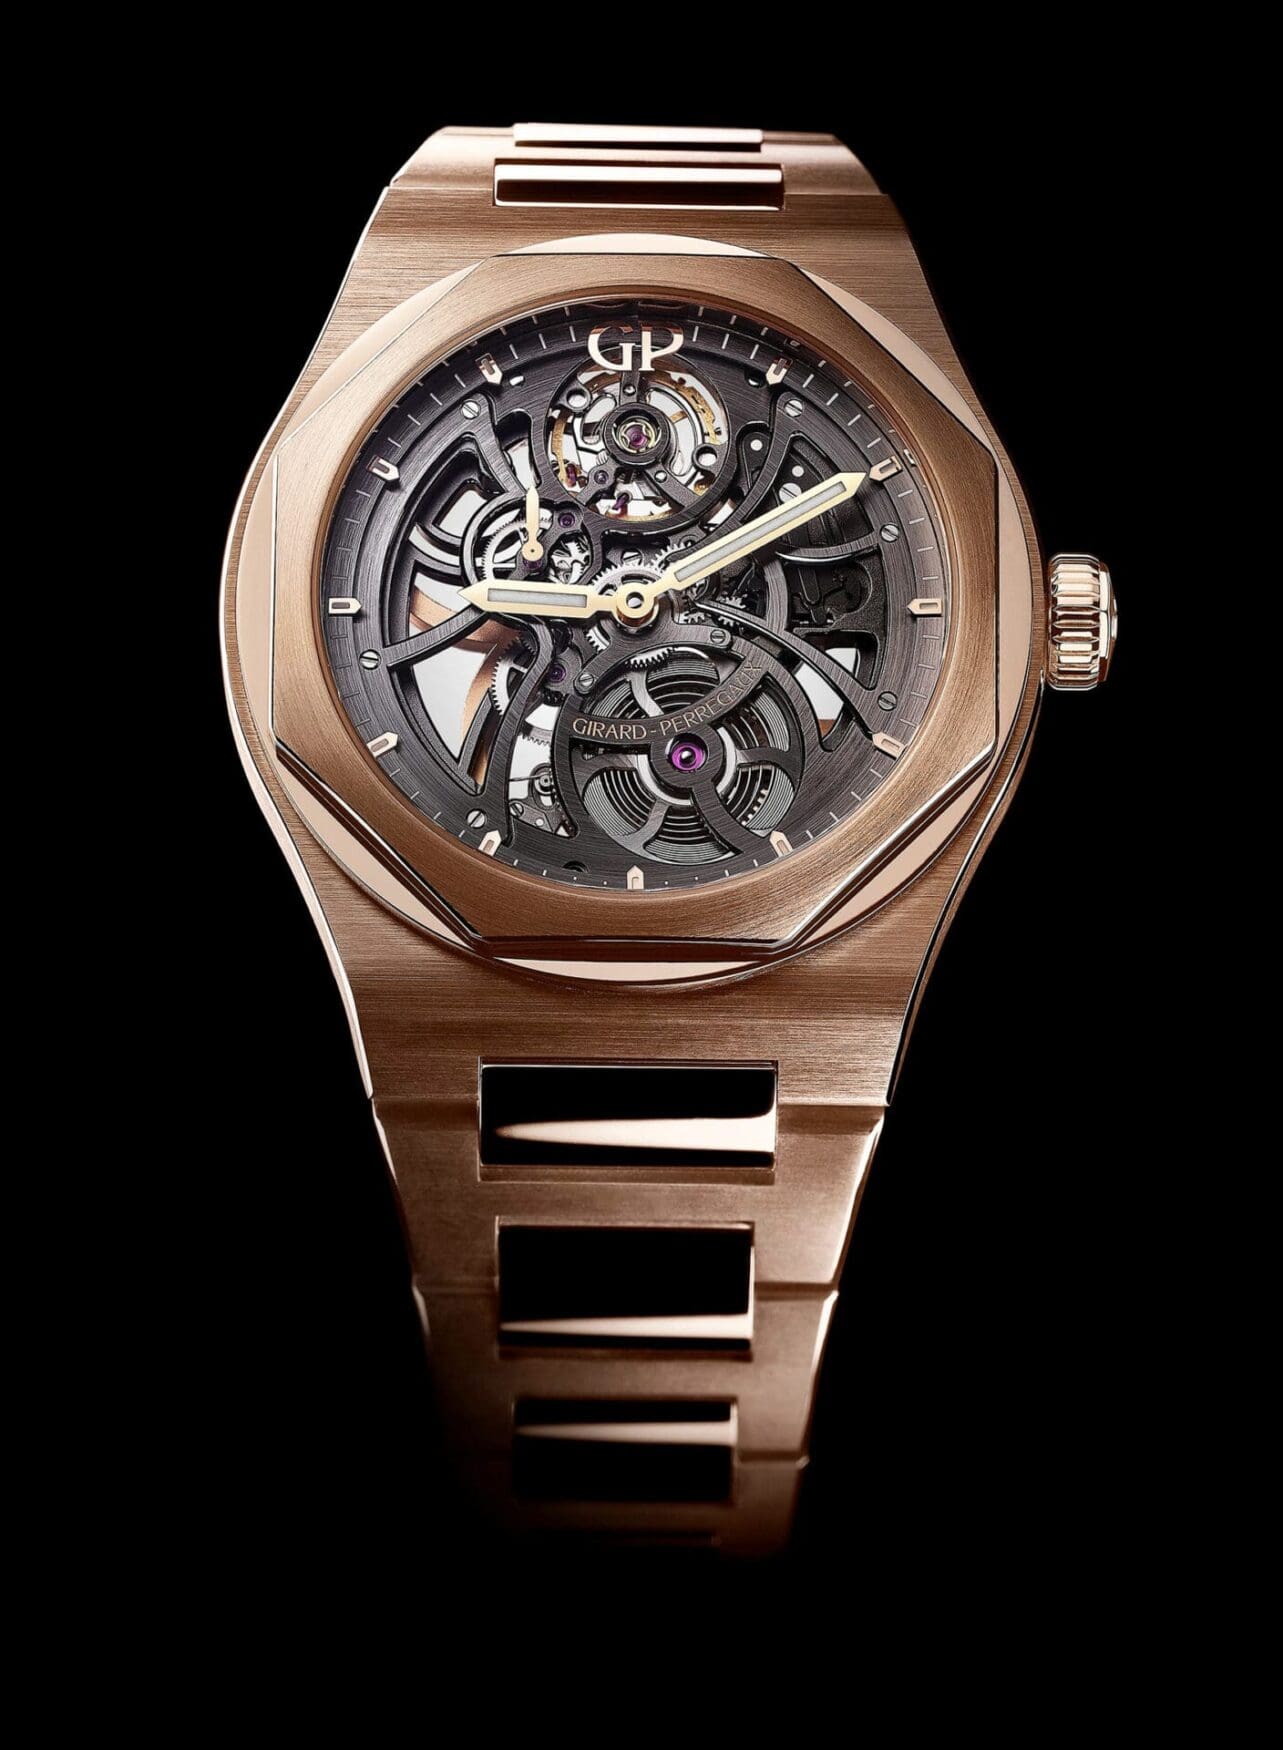 INTRODUCING: When less is more – the Girard-Perregaux Laureato Skeleton